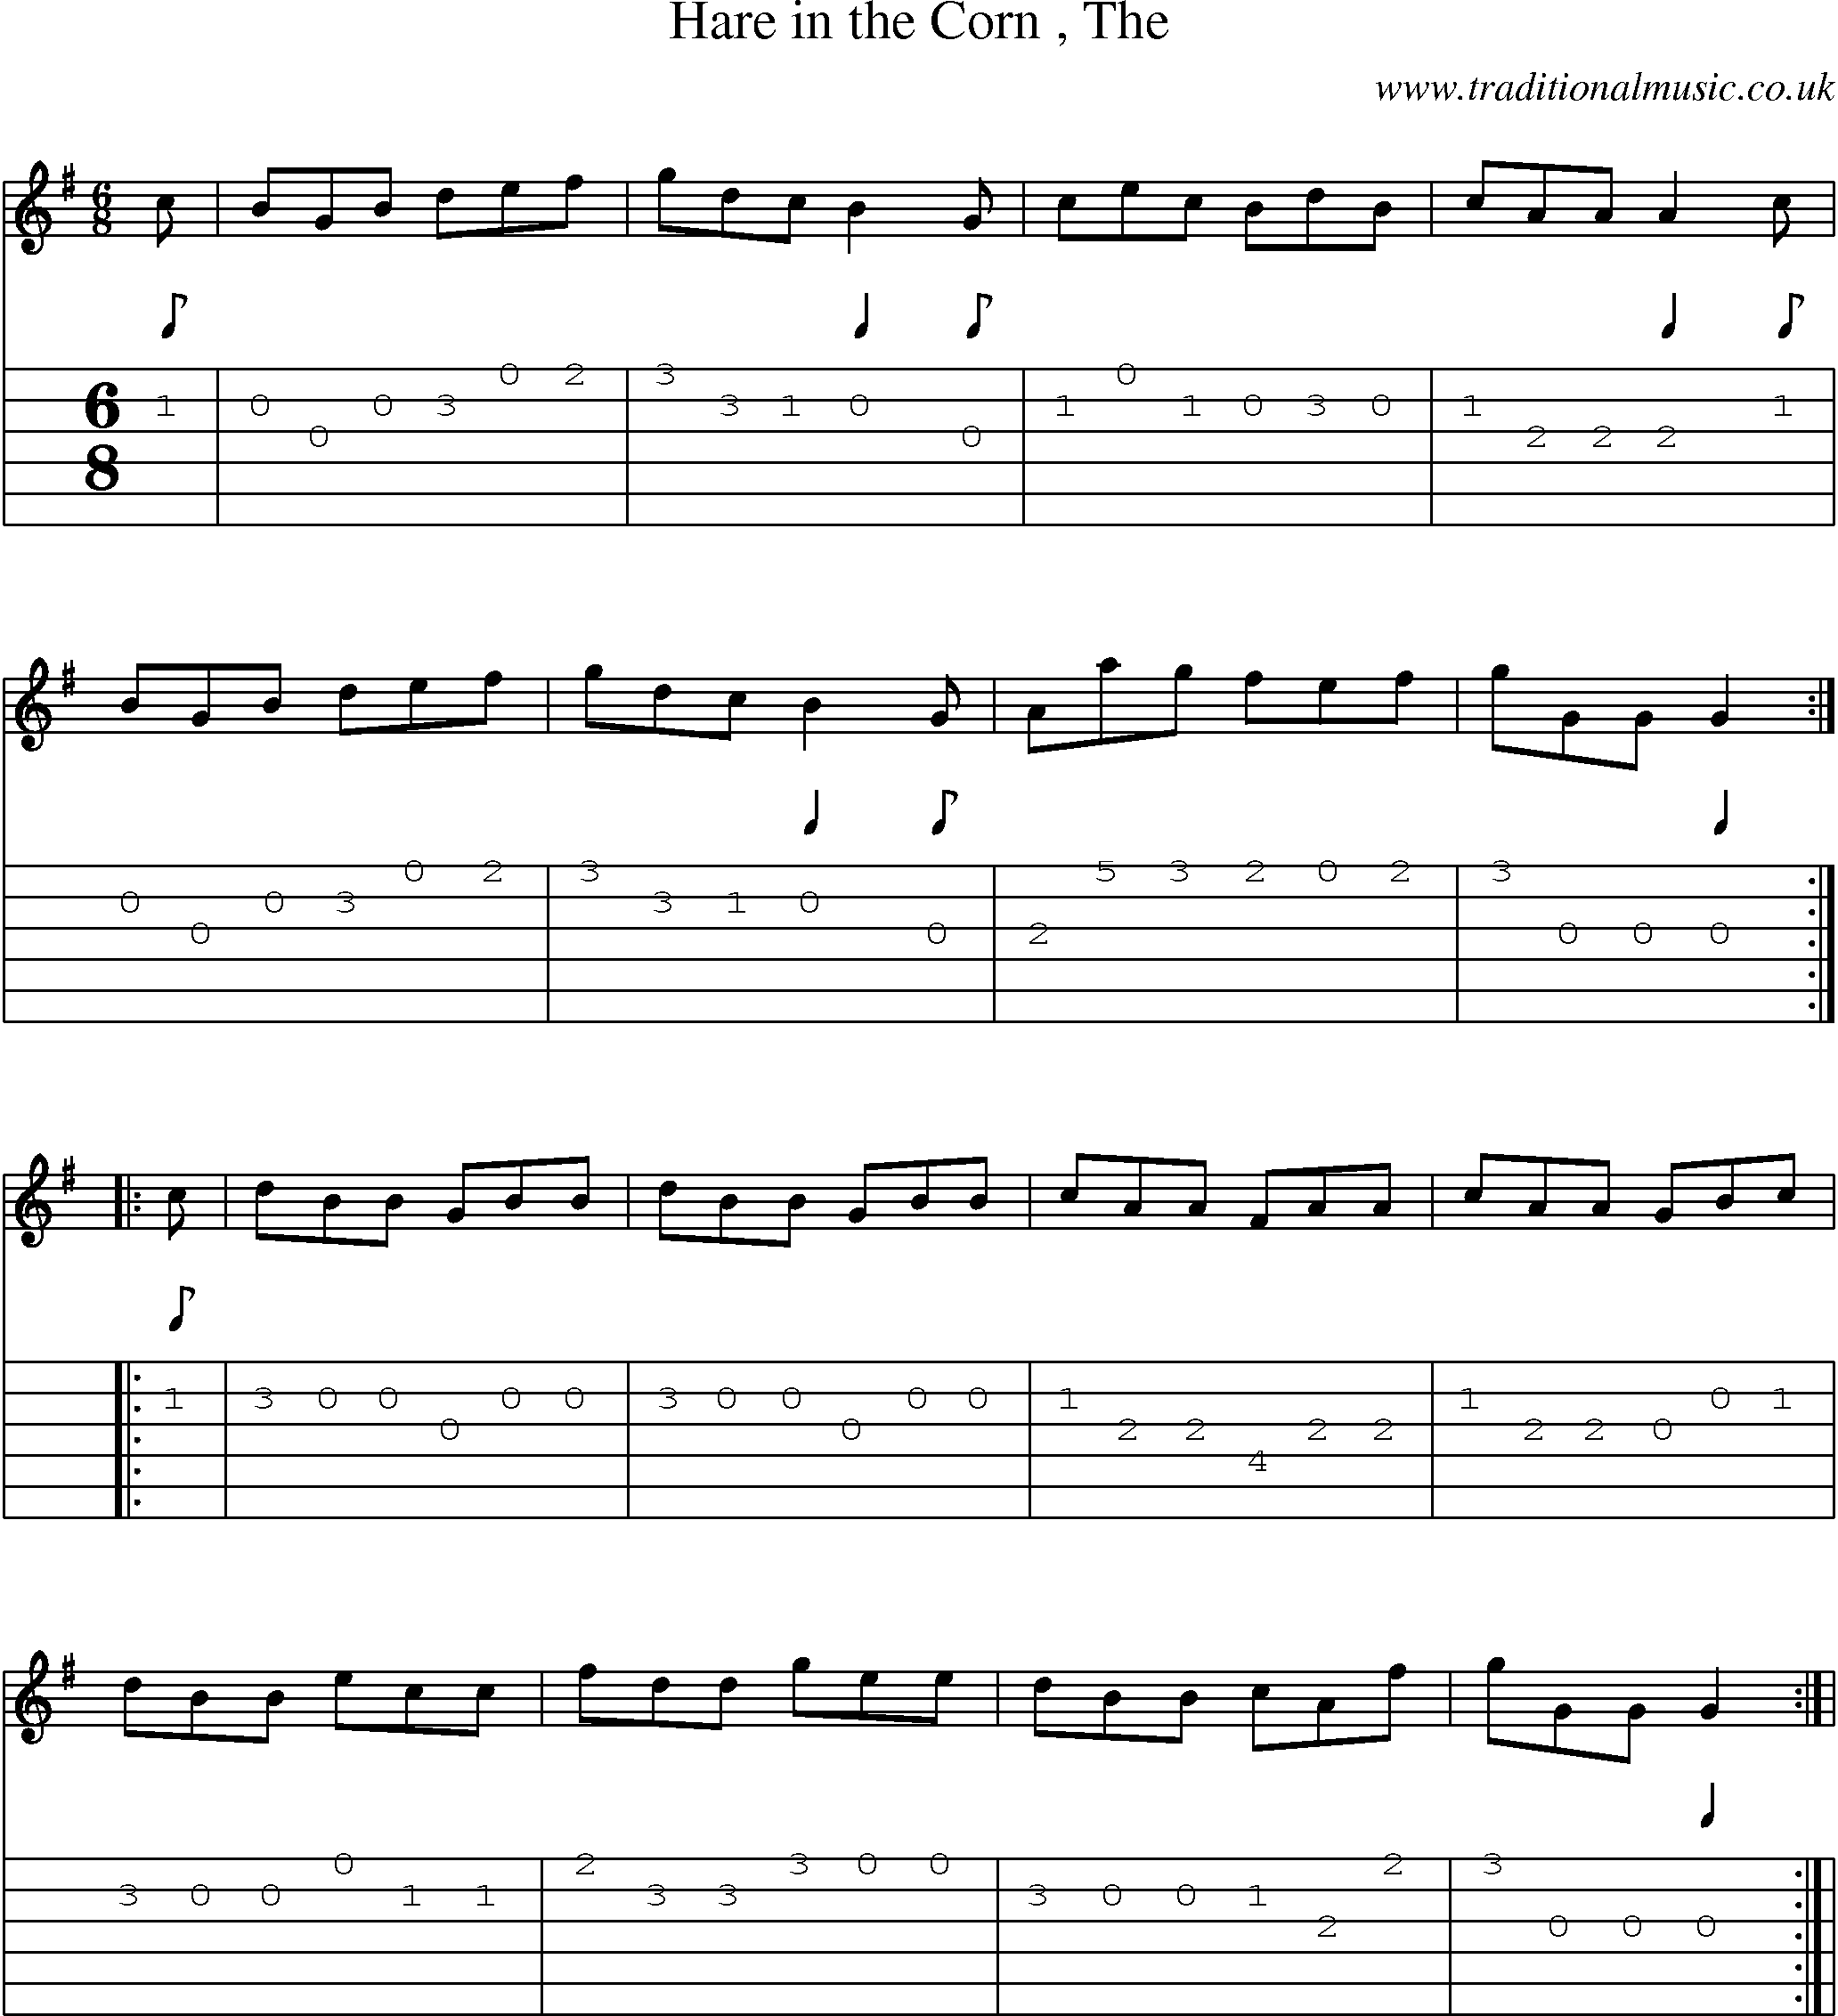 Music Score and Guitar Tabs for Hare in Corn 